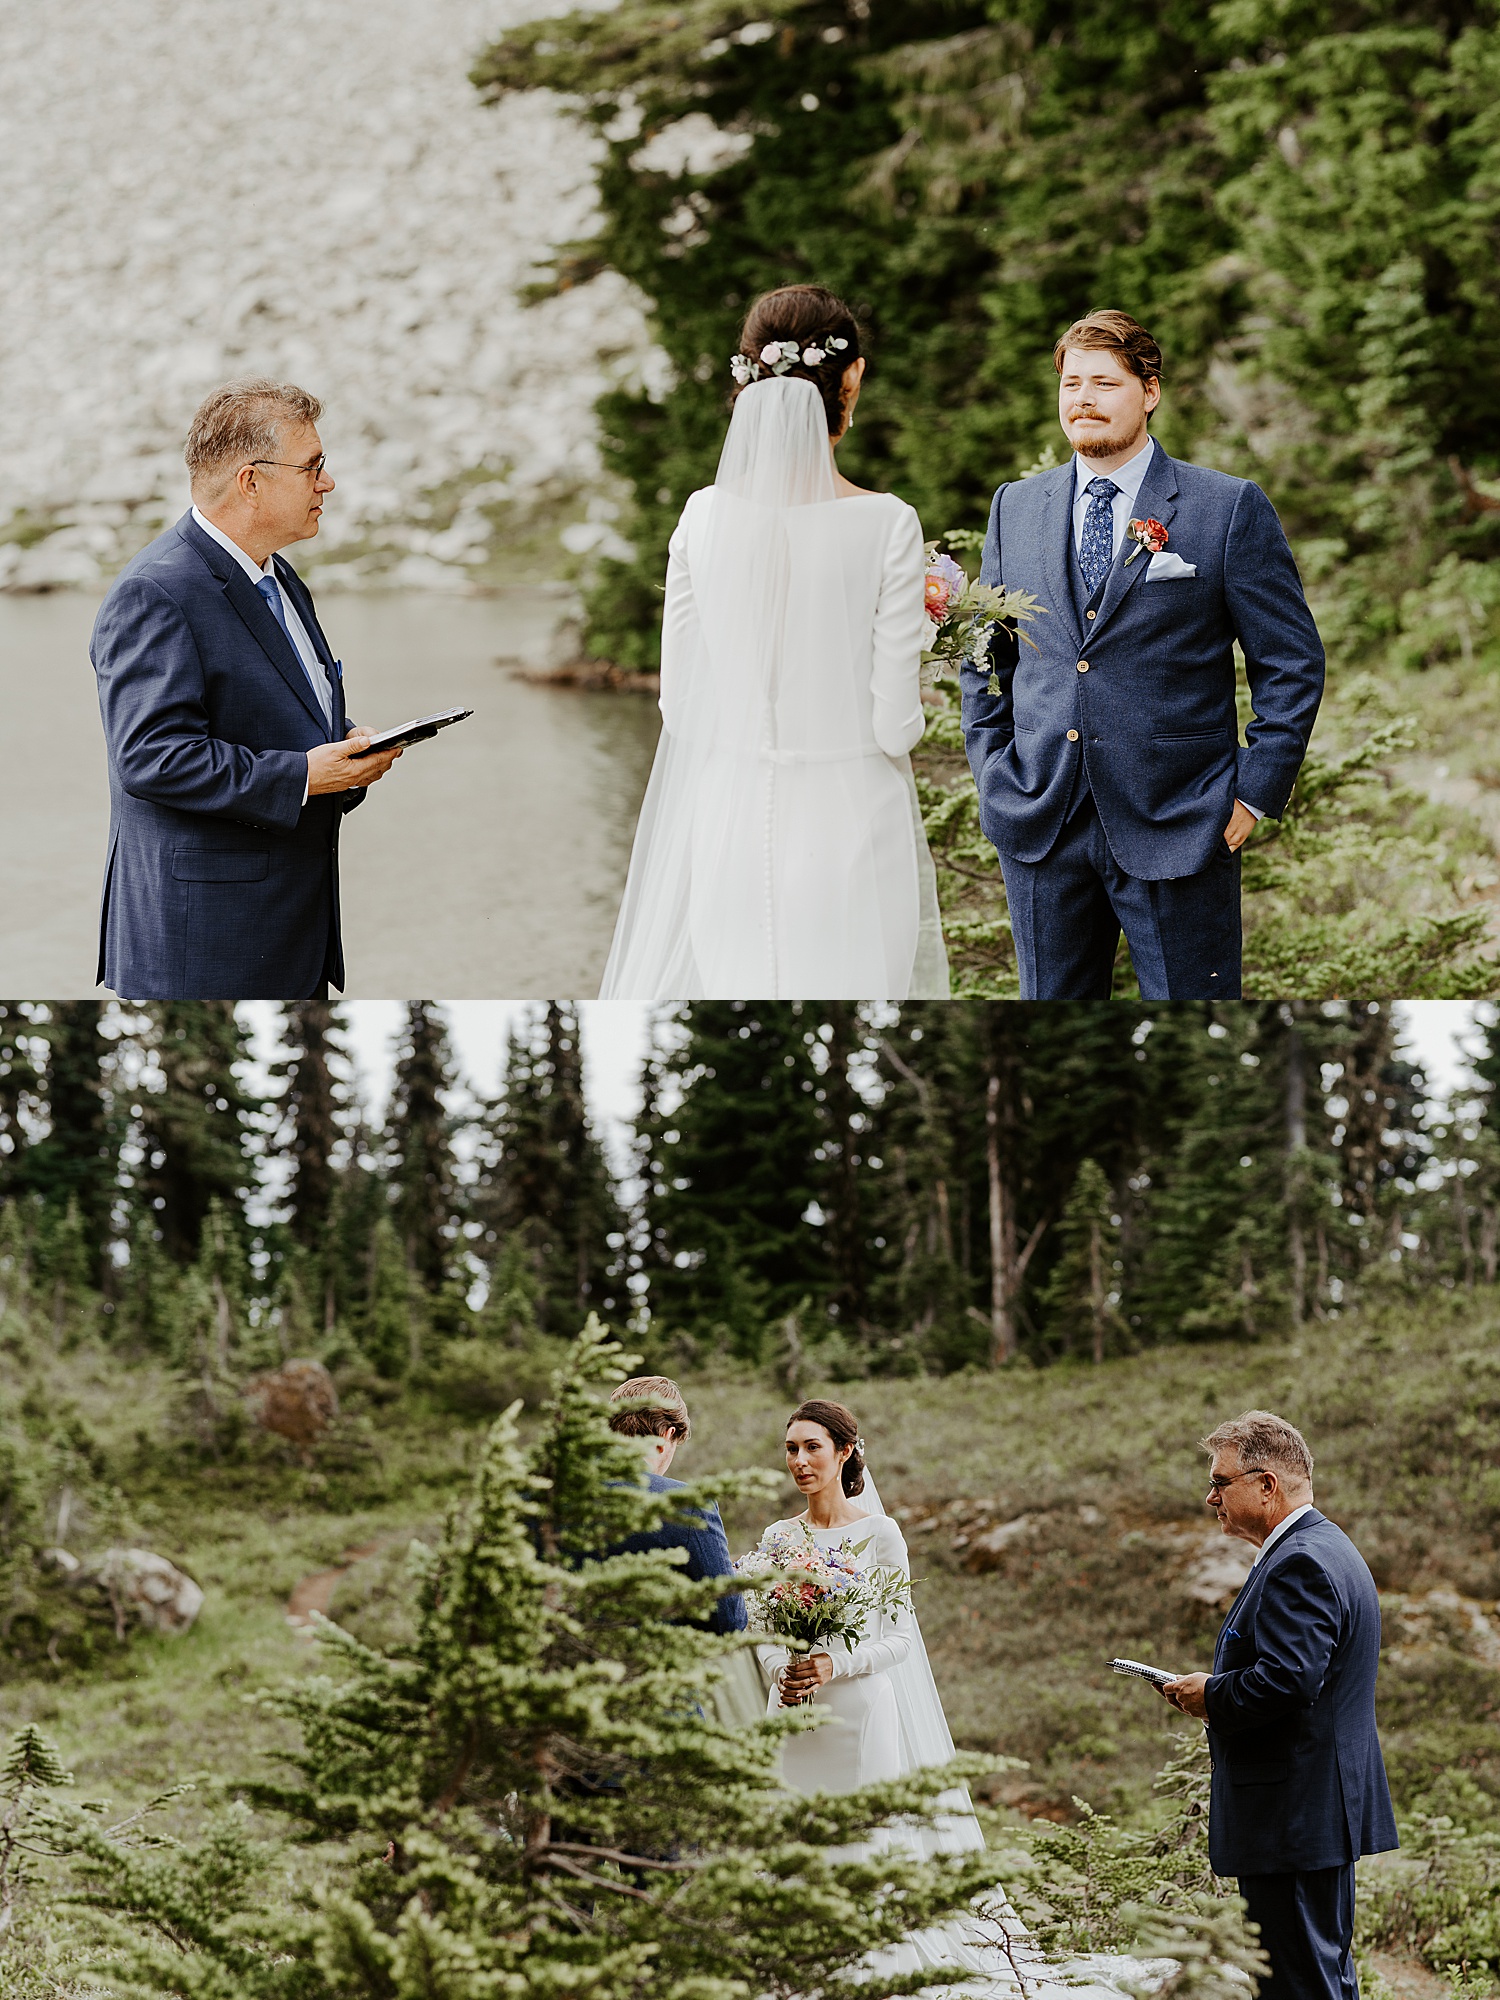 intimate elopement ceremony by a lake